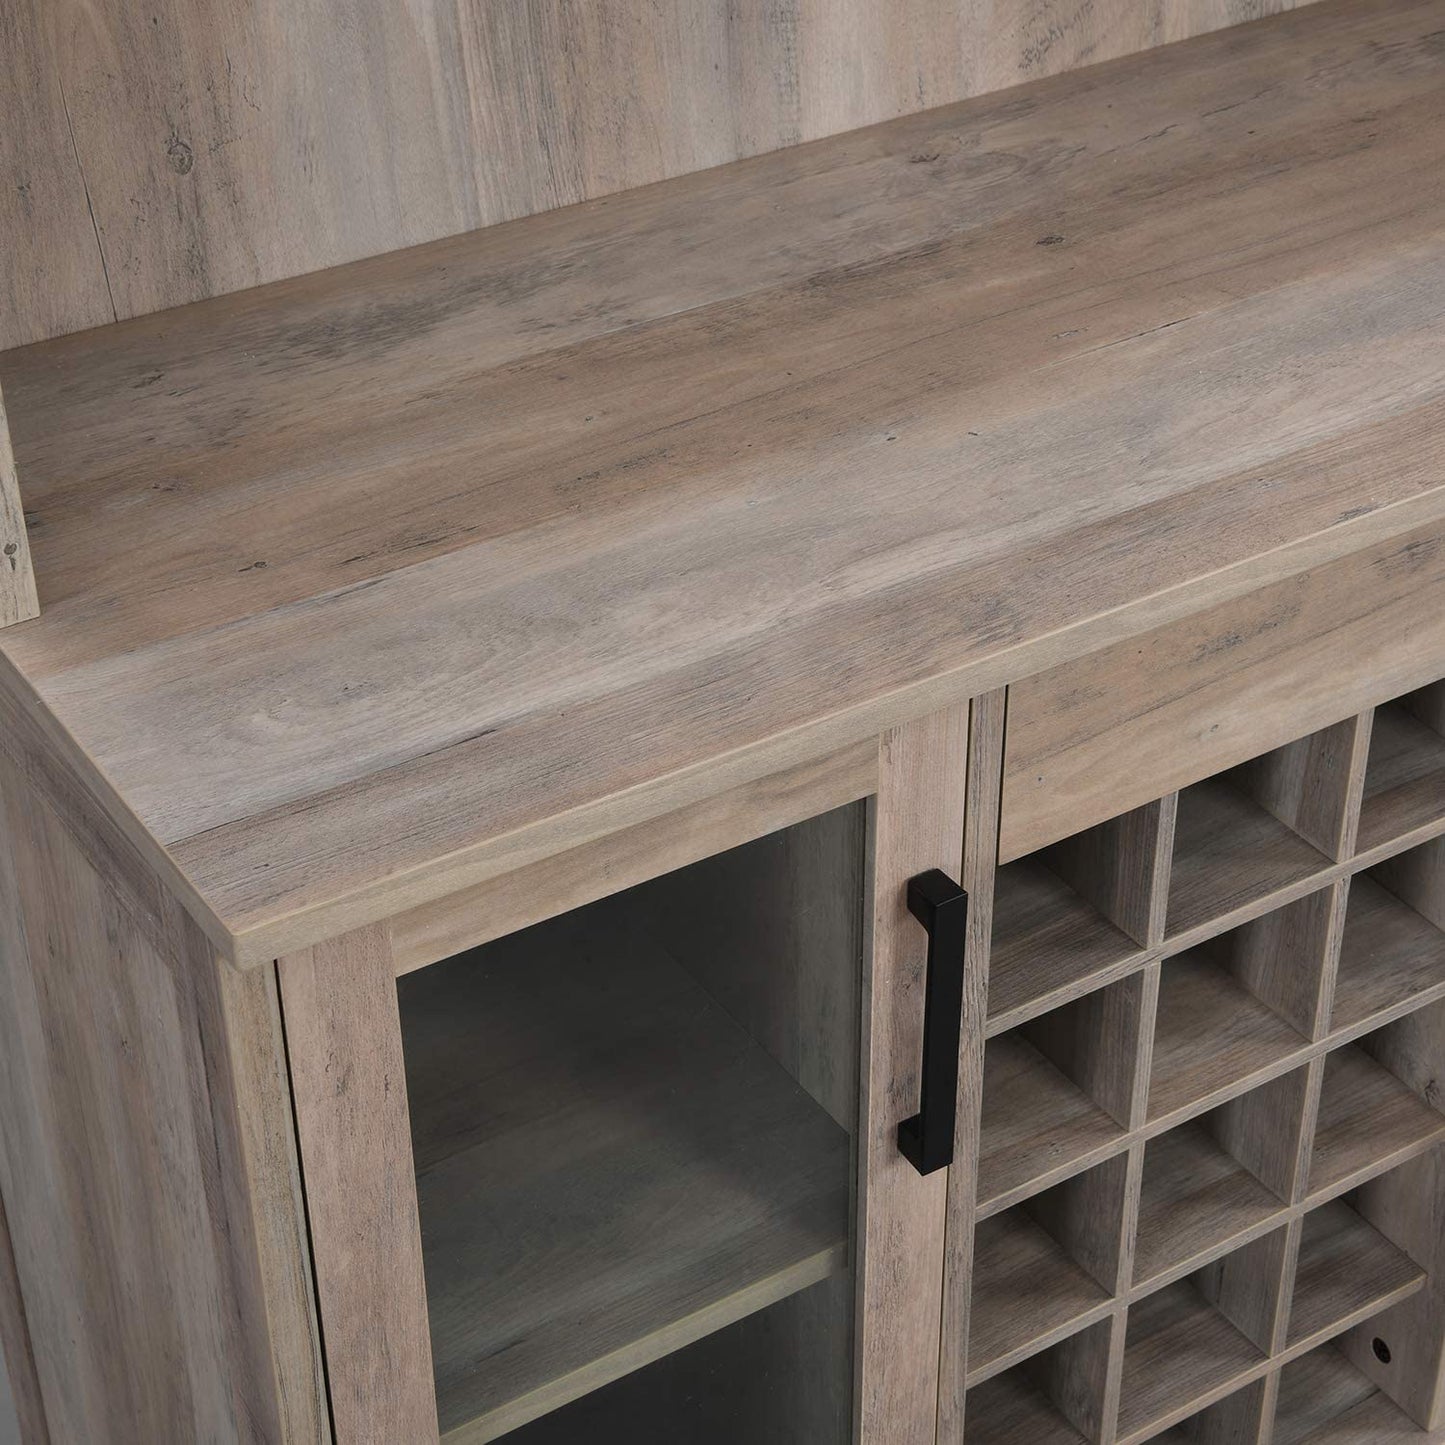 Bar Cabinet: Bar Cabinet with Wine Rack and Glass Doors in Grey Wash Finish 